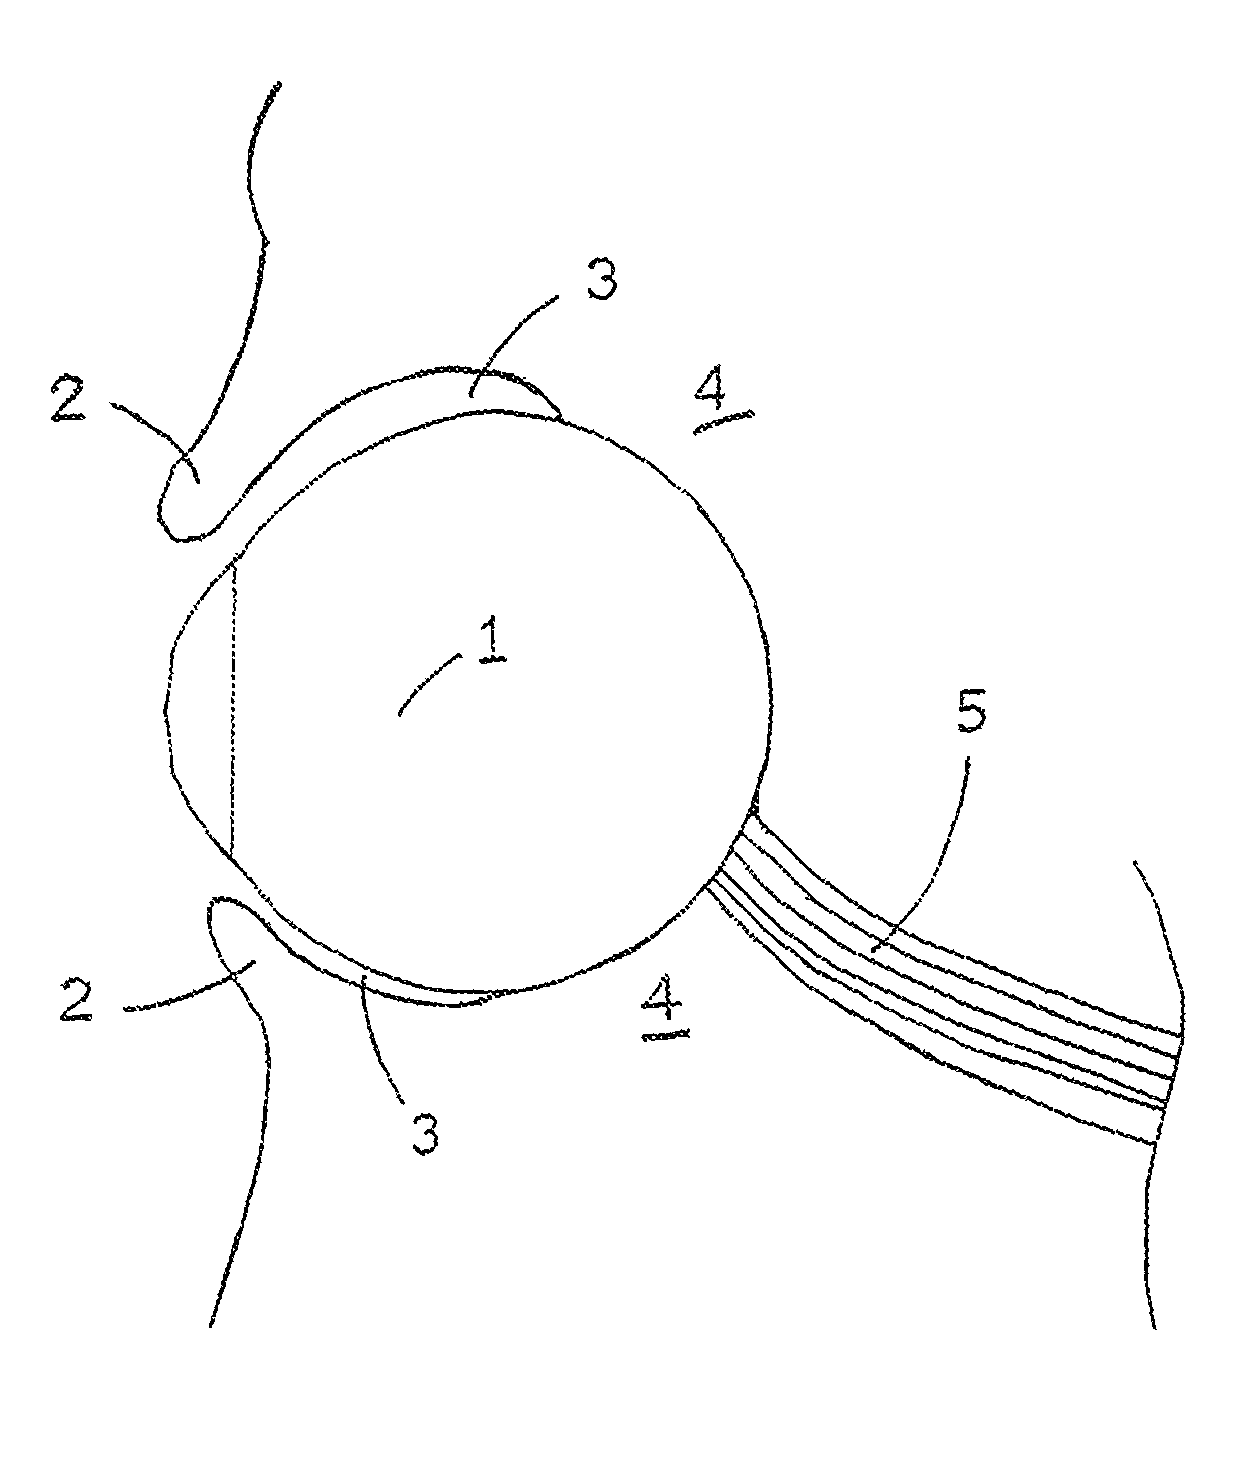 Medical device and method for temperature control and treatment of the eye and surrounding tissues via magnetic drug therapy